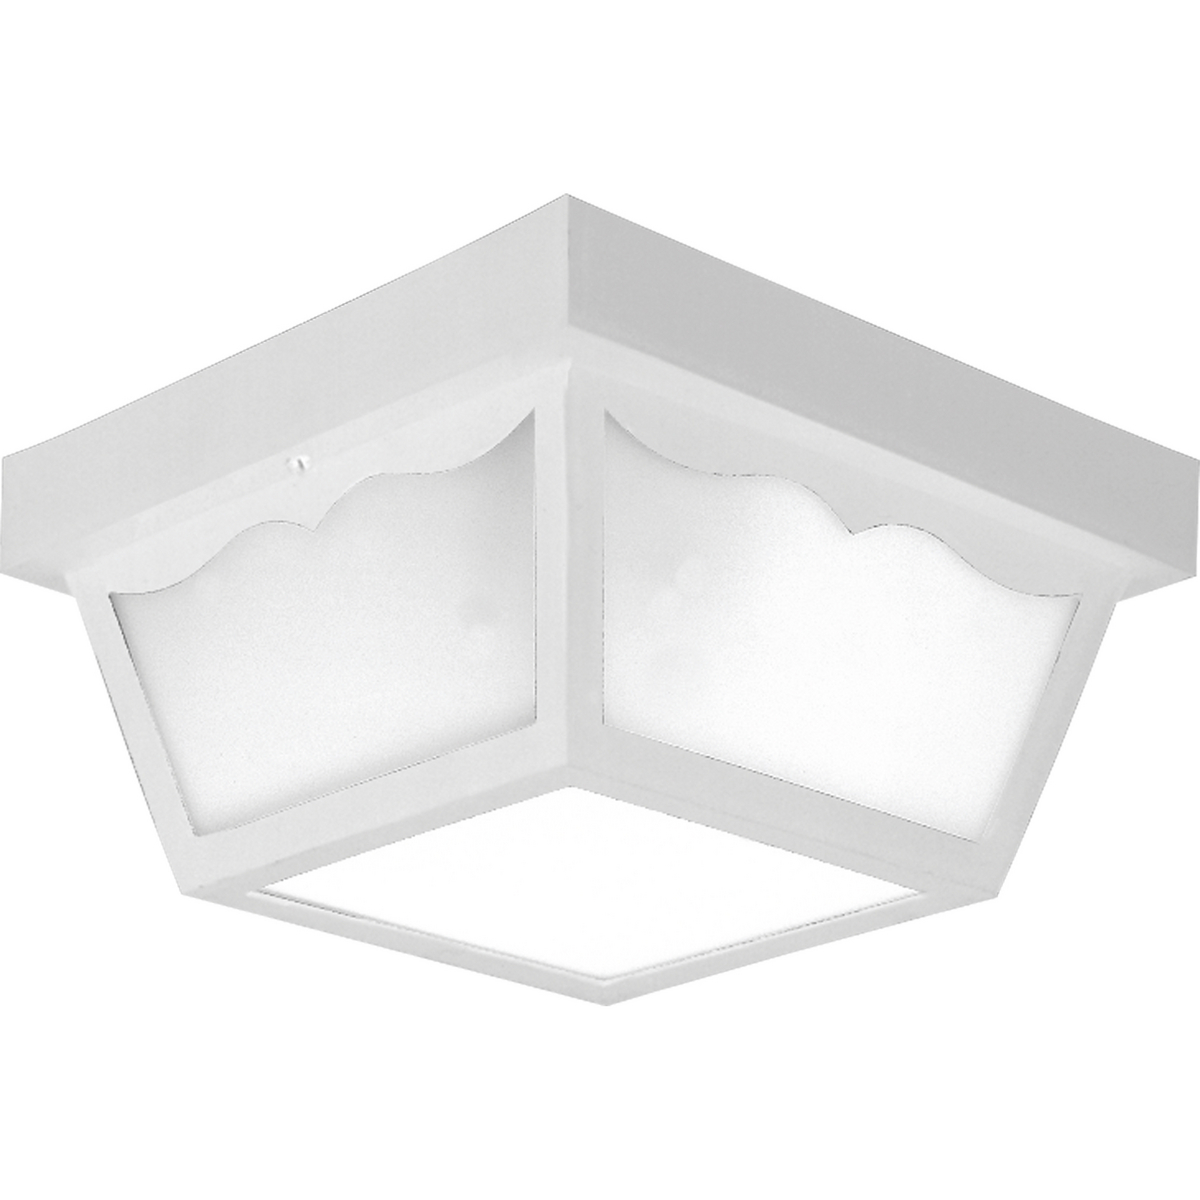 A white two-light non-metallic ceiling light featuring a one-piece, white acrylic diffuser. The fixture is complete with scalloped edge detailing to enhance any outdoor space.